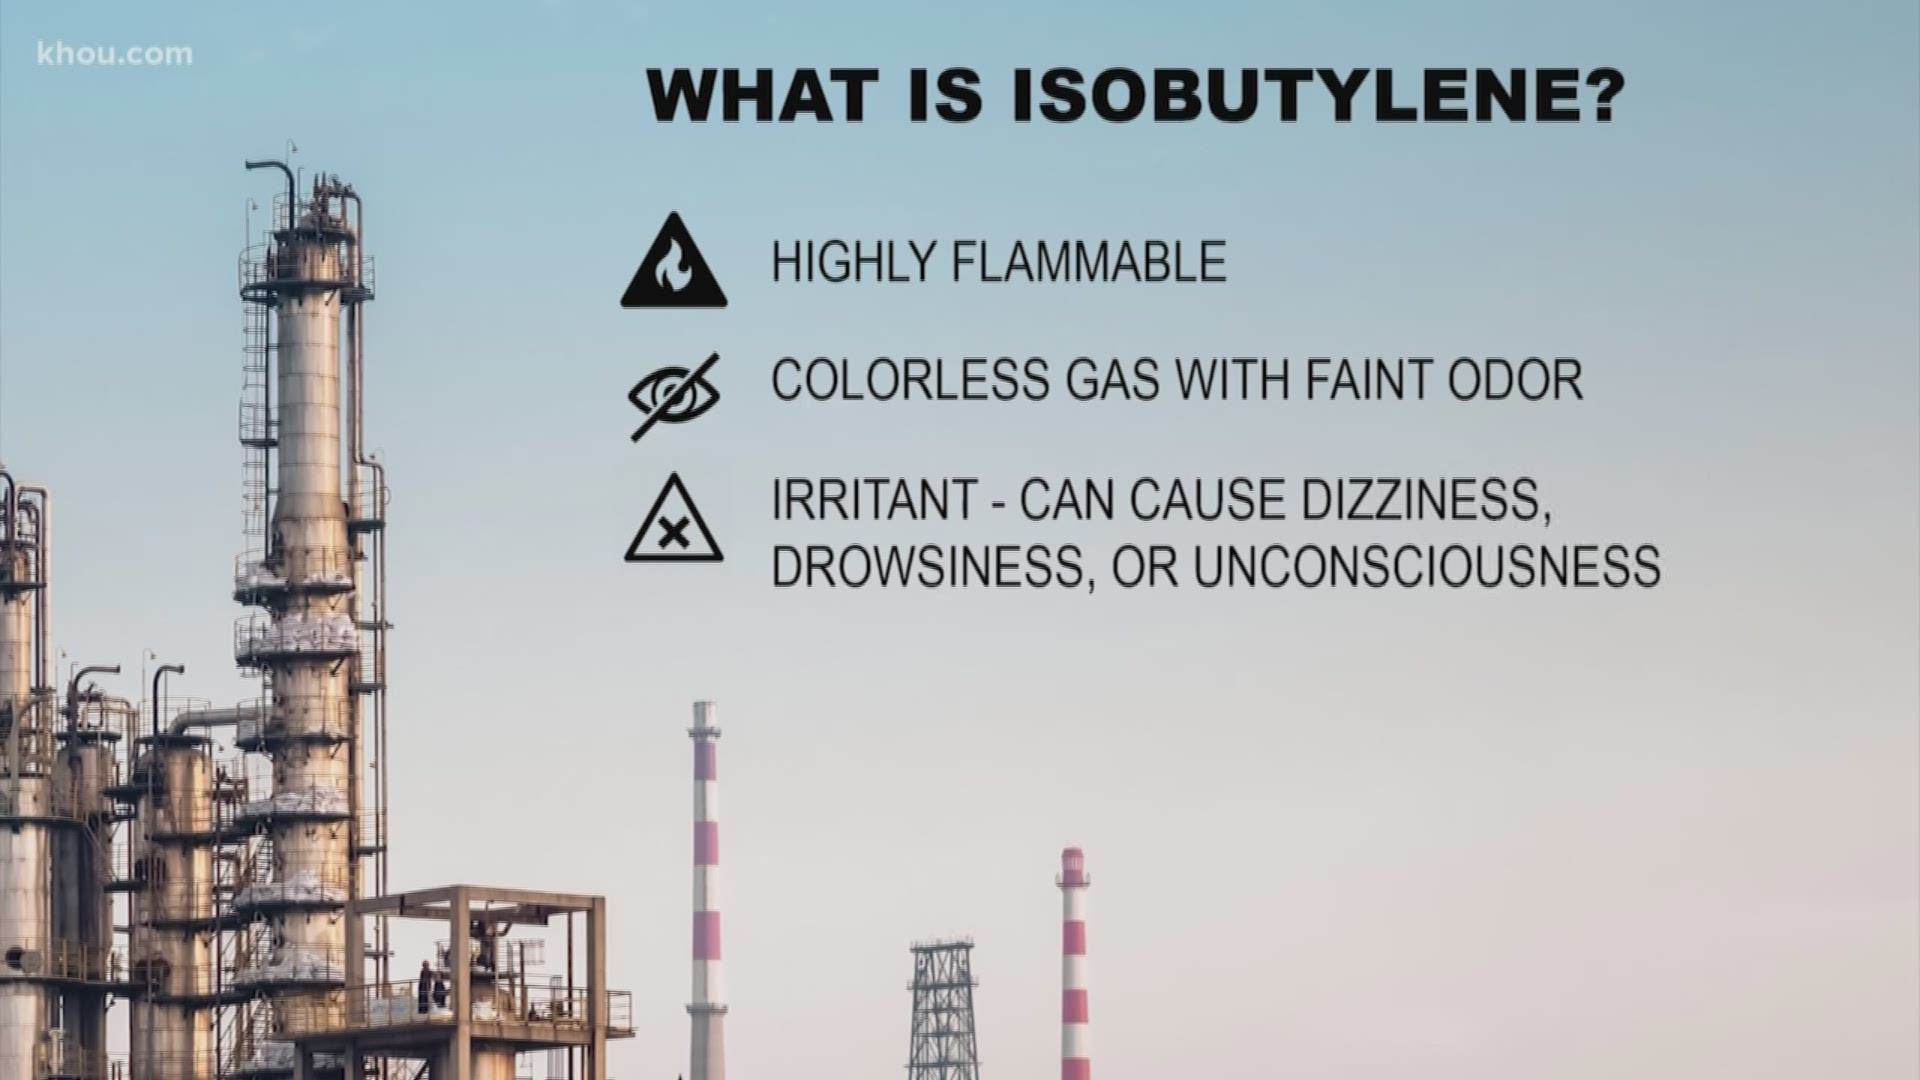 Isobutylene, which burned at the KMCO plant in Crosby, is a highly flammable colorless gas that can cause a faint petroleum-like odor, according to the National Oceanic and Atmospheric Administration.